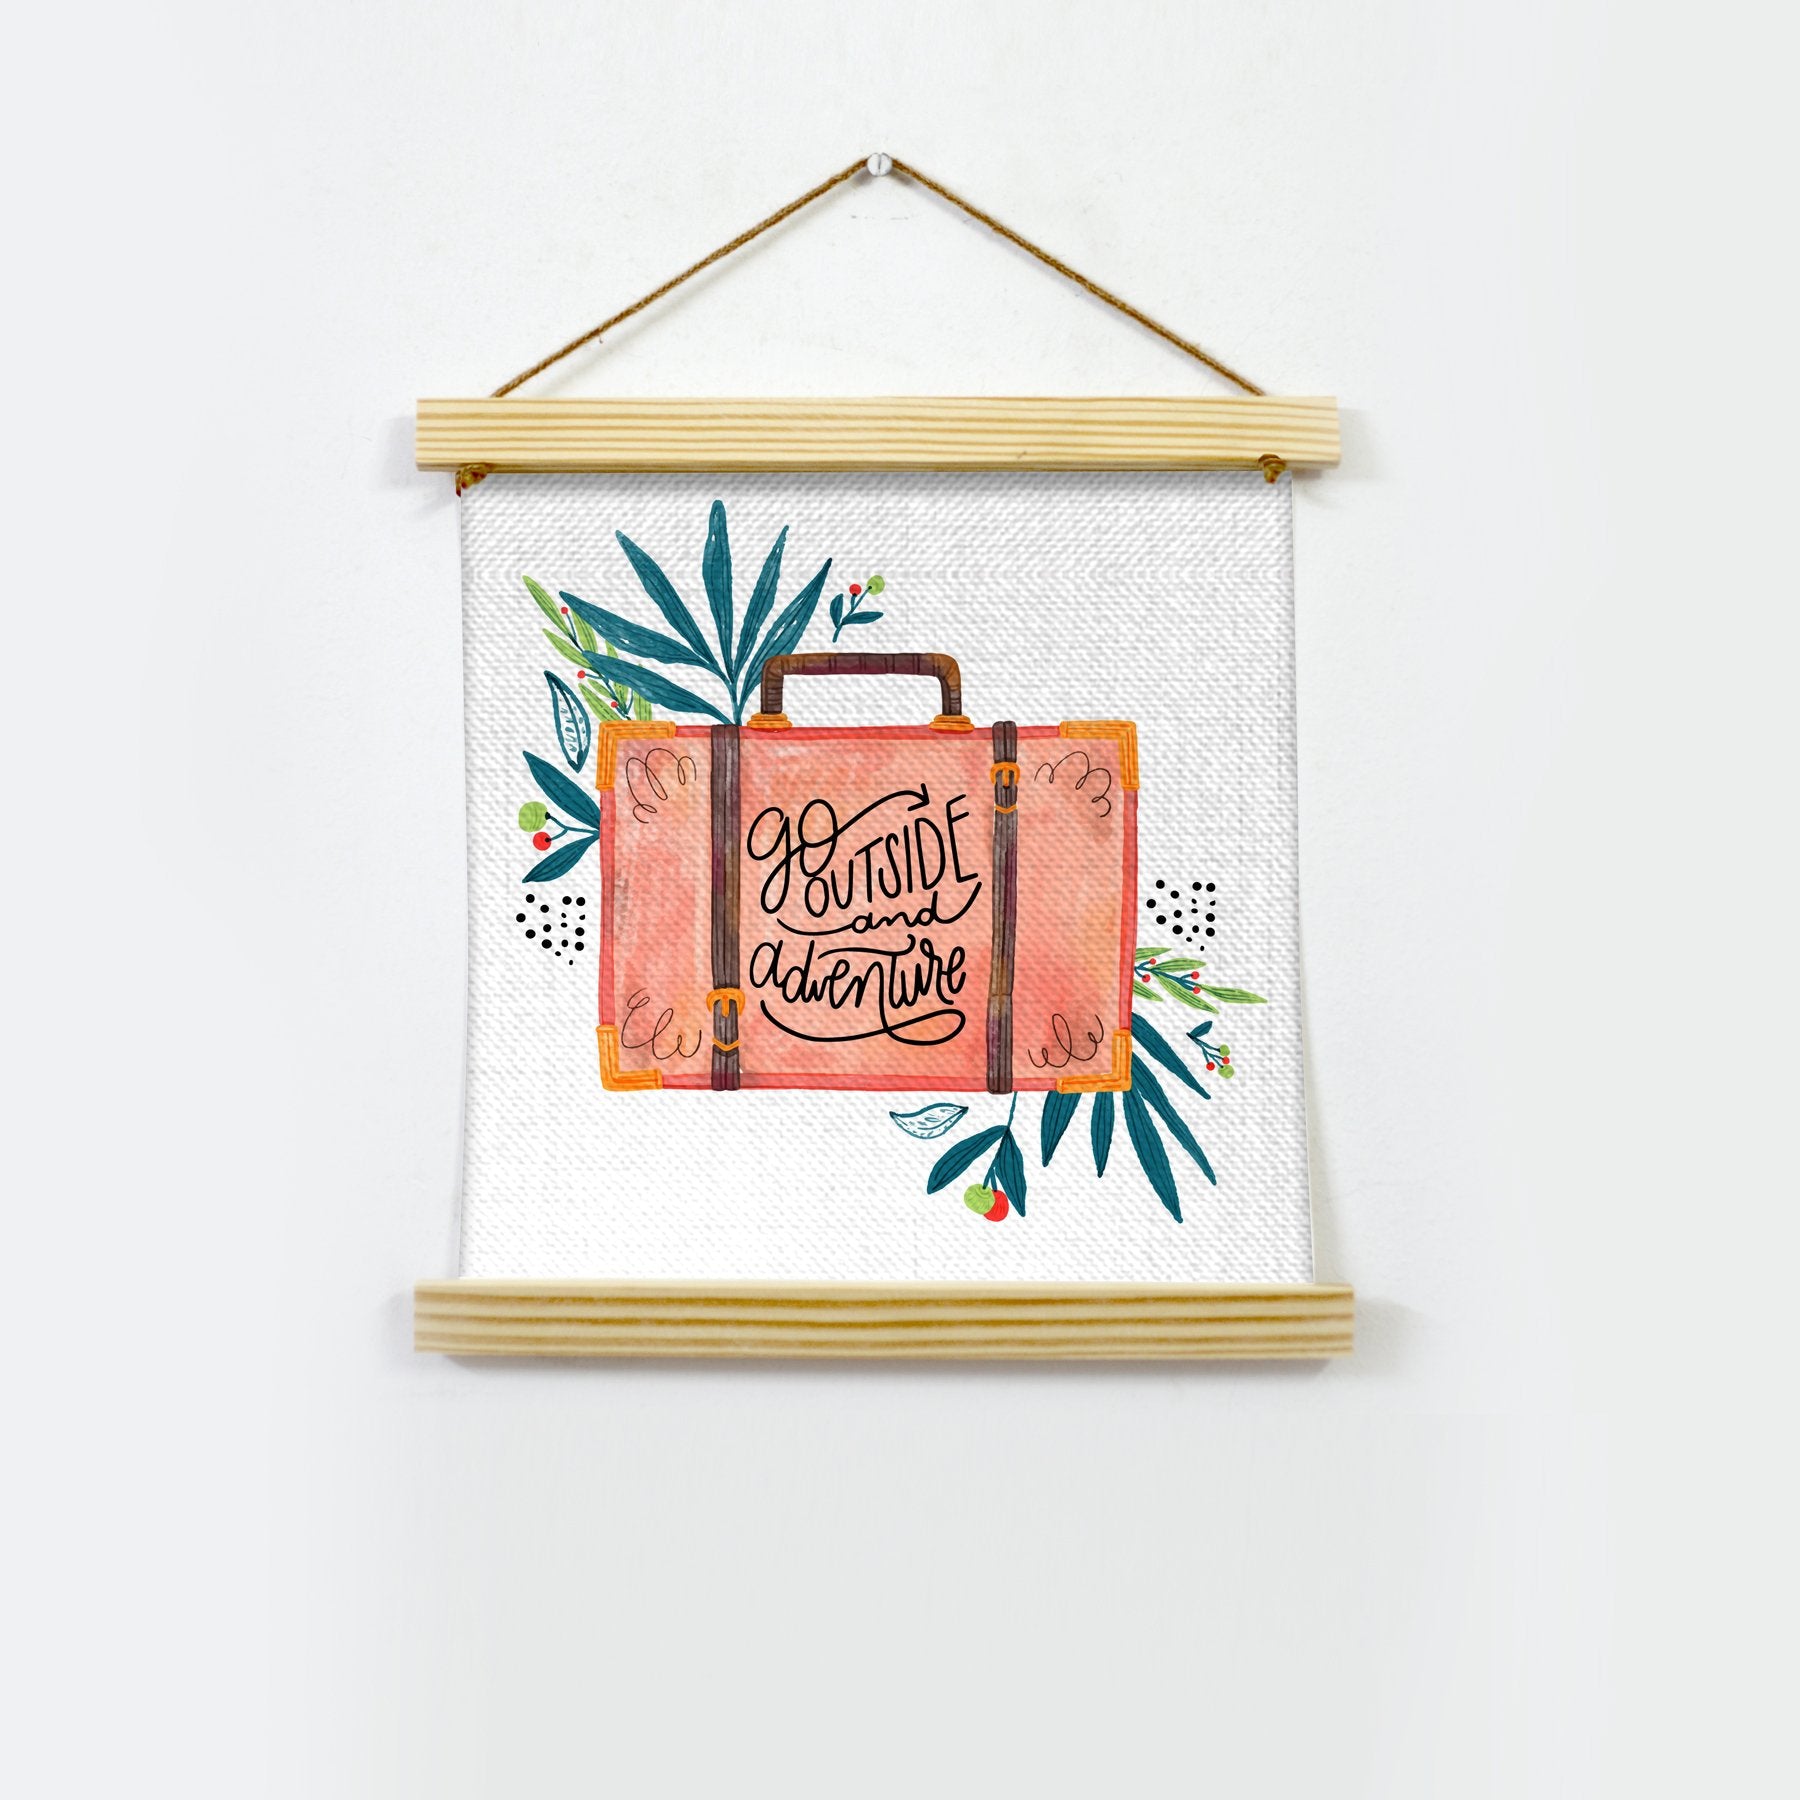 Go outside and adventure Hanging Canvas